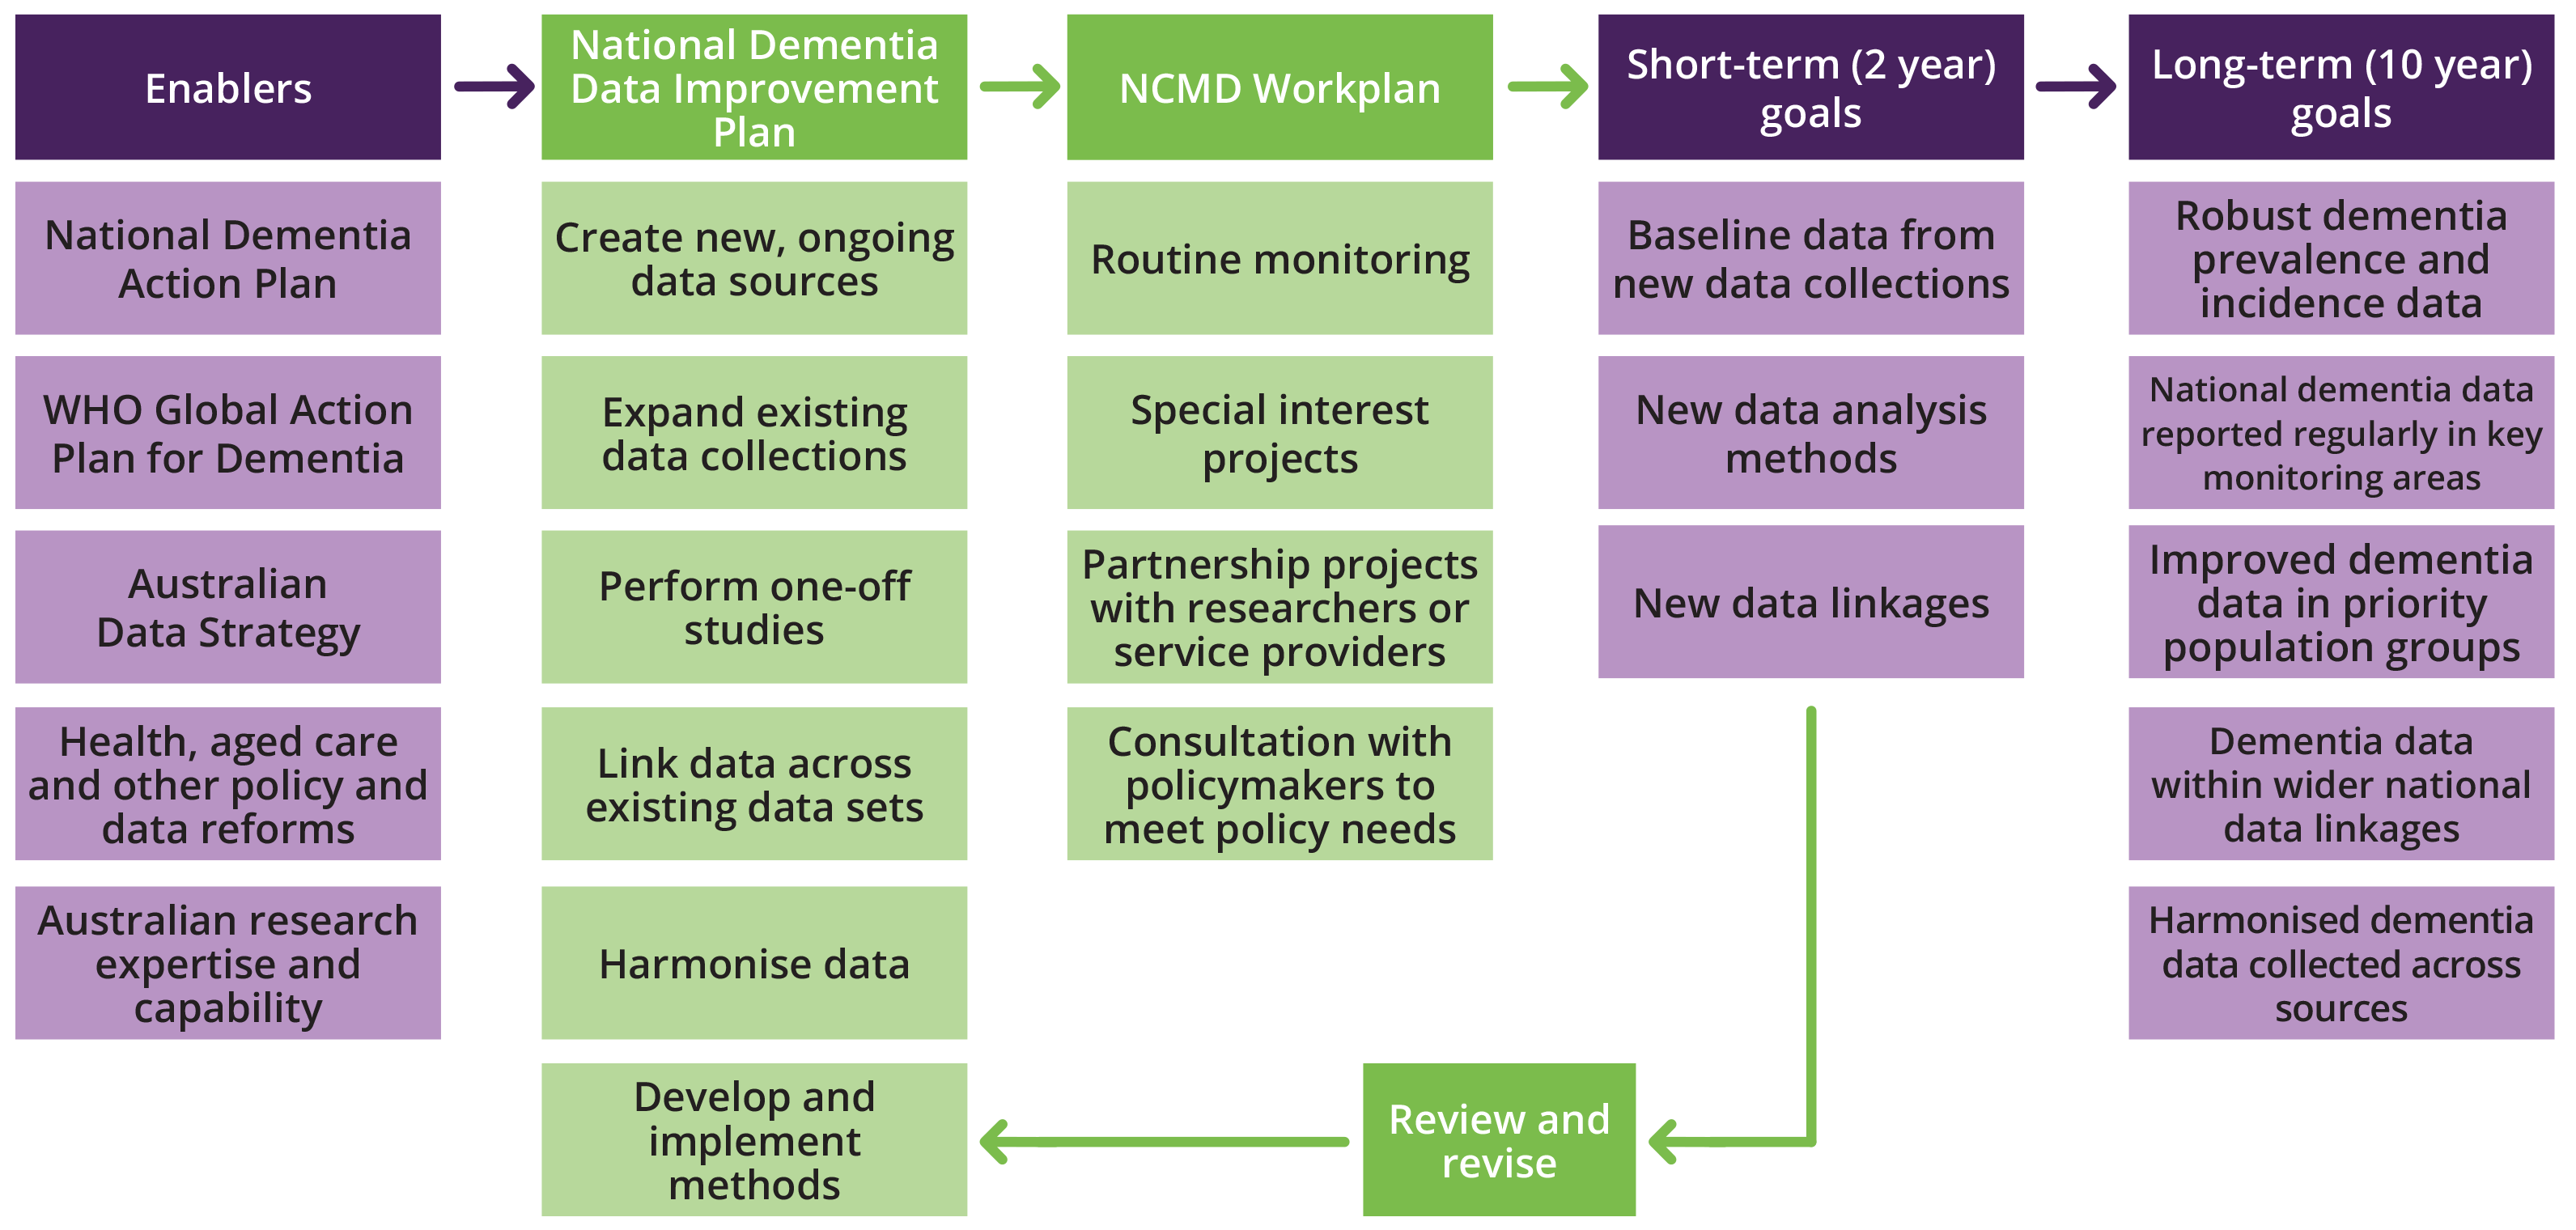 The enablers for the National Data Improvement Plan (NDIP) include the objectives of the National Dementia Action Plan, the WHO Global Action Plan for Dementia, Australian Government data and policy reforms, and Australian research expertise.